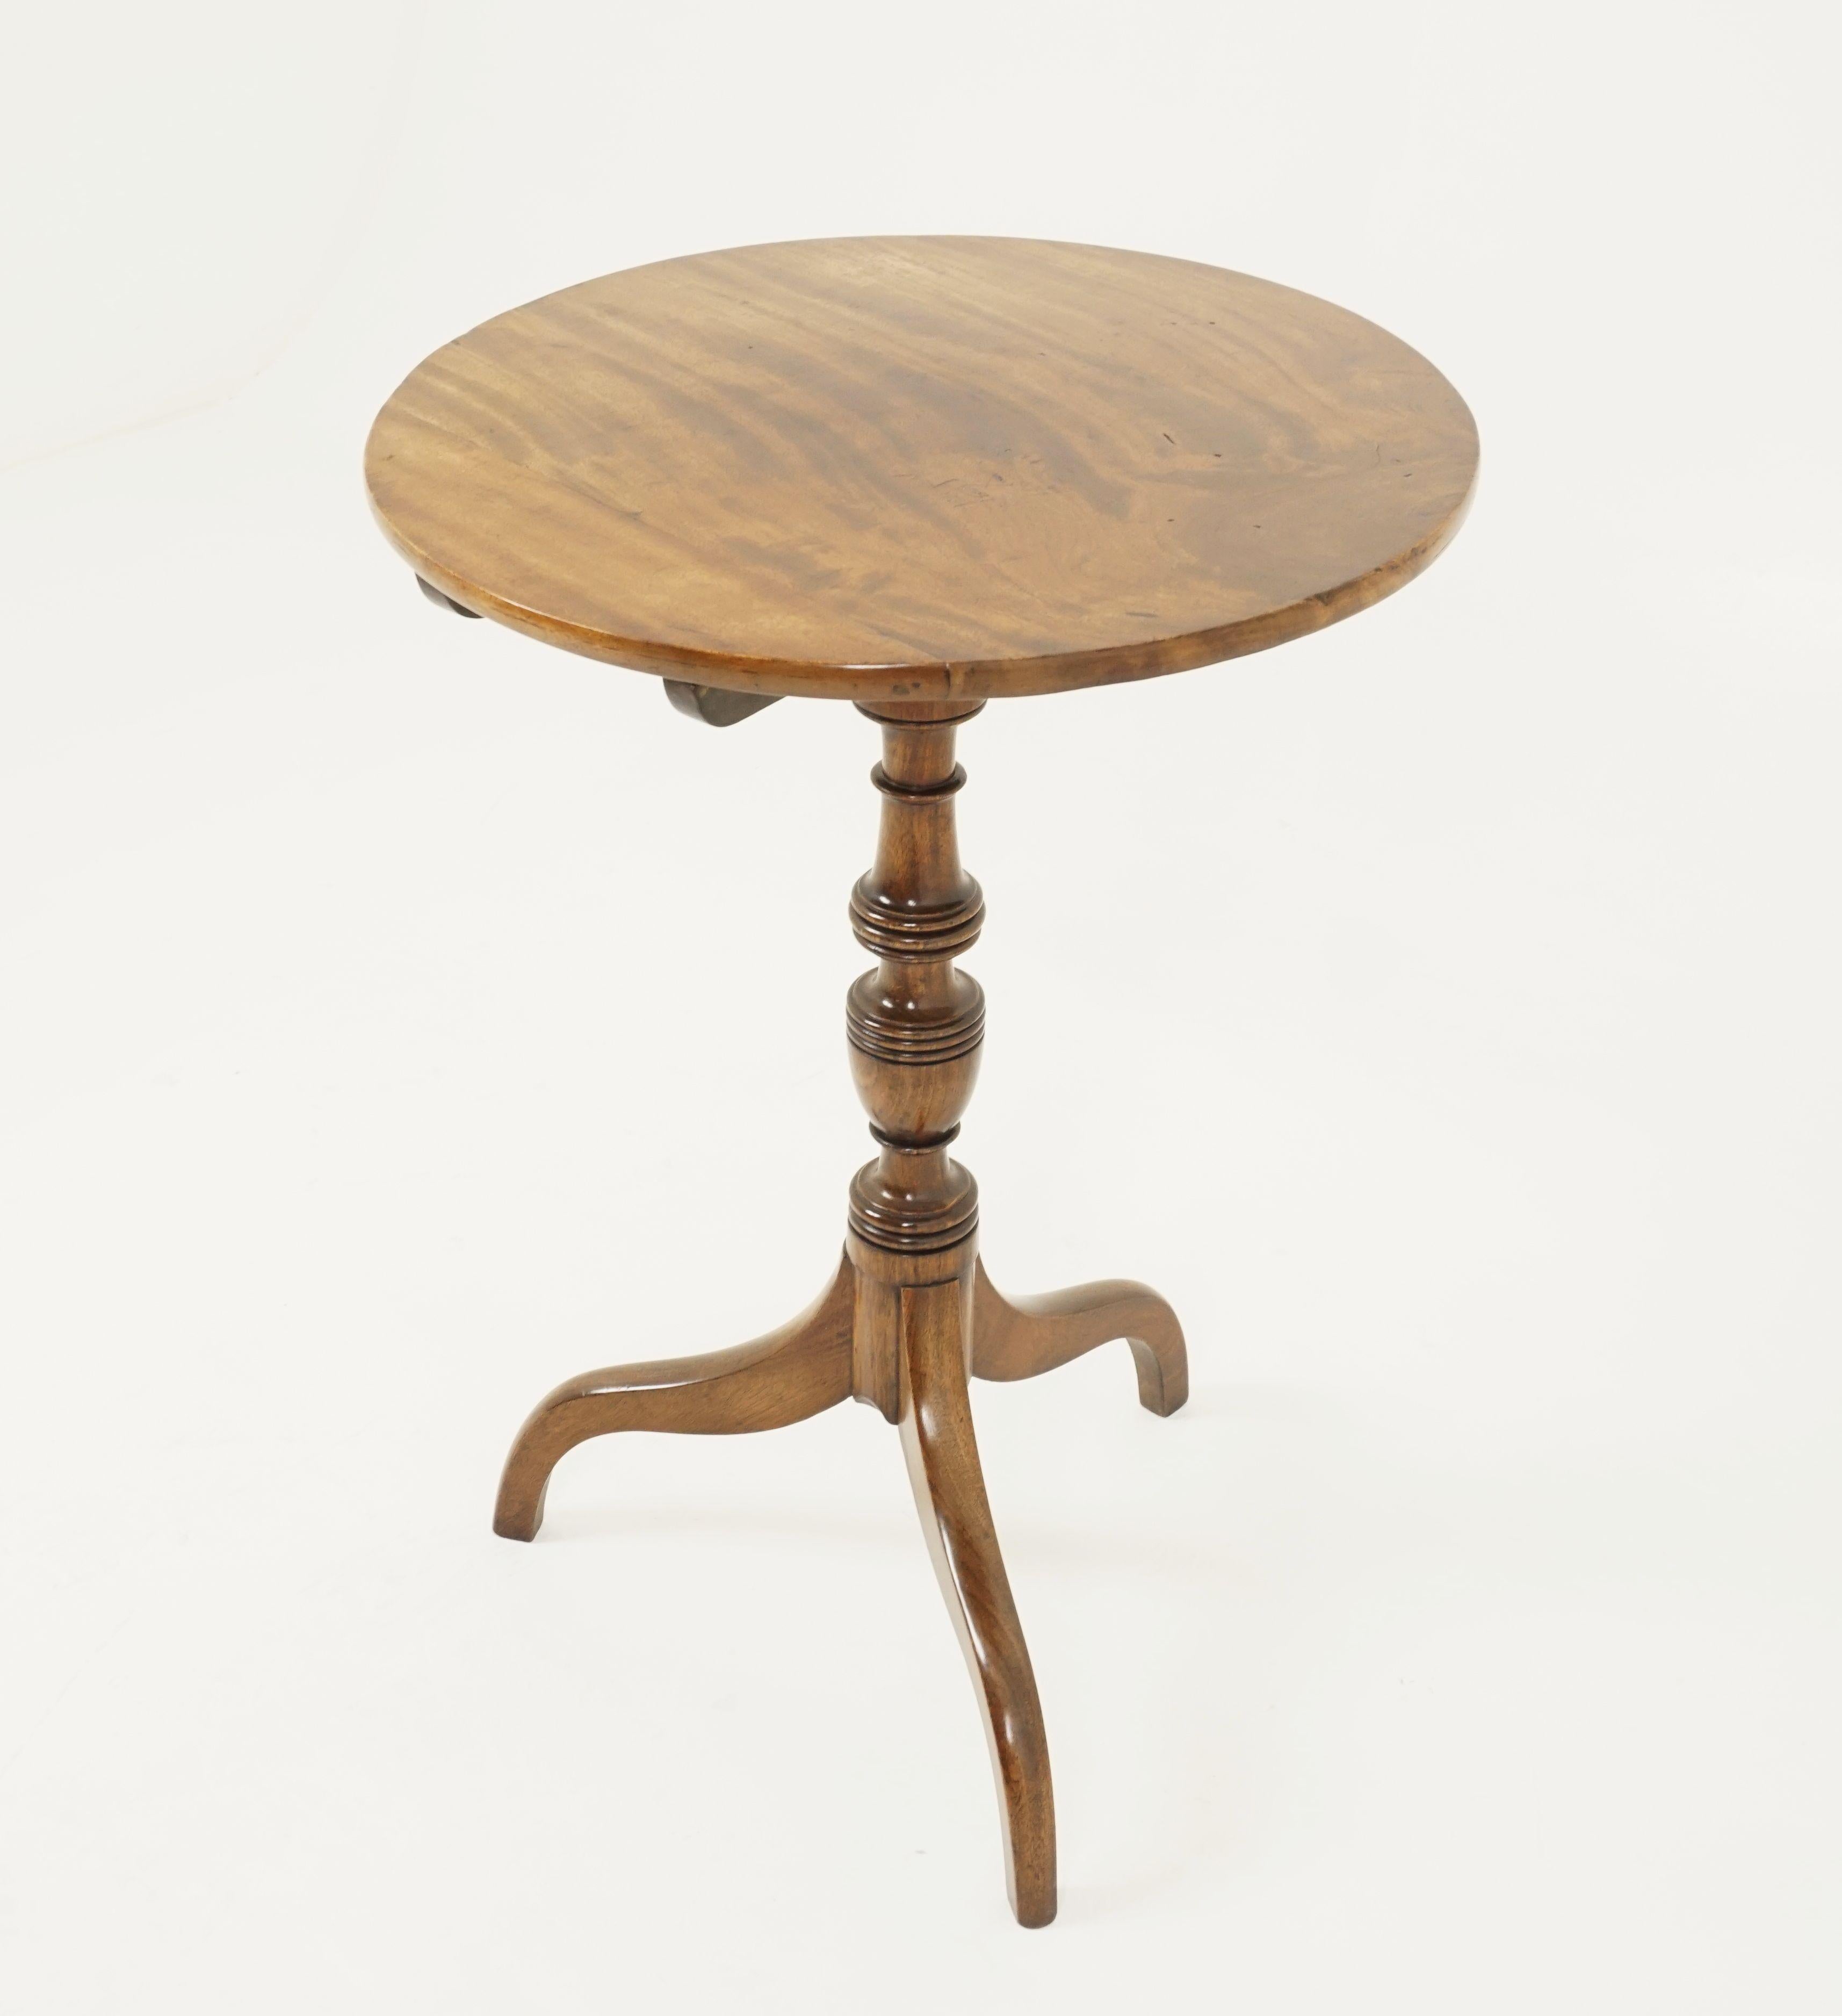 Antique circular walnut table, victorian tilt top table, Scotland 1860

Scotland 1860
Solid walnut
Original finish
Circular top having been made from one complete piece of walnut
Supported by a central turned ring pillar
Above a tripod